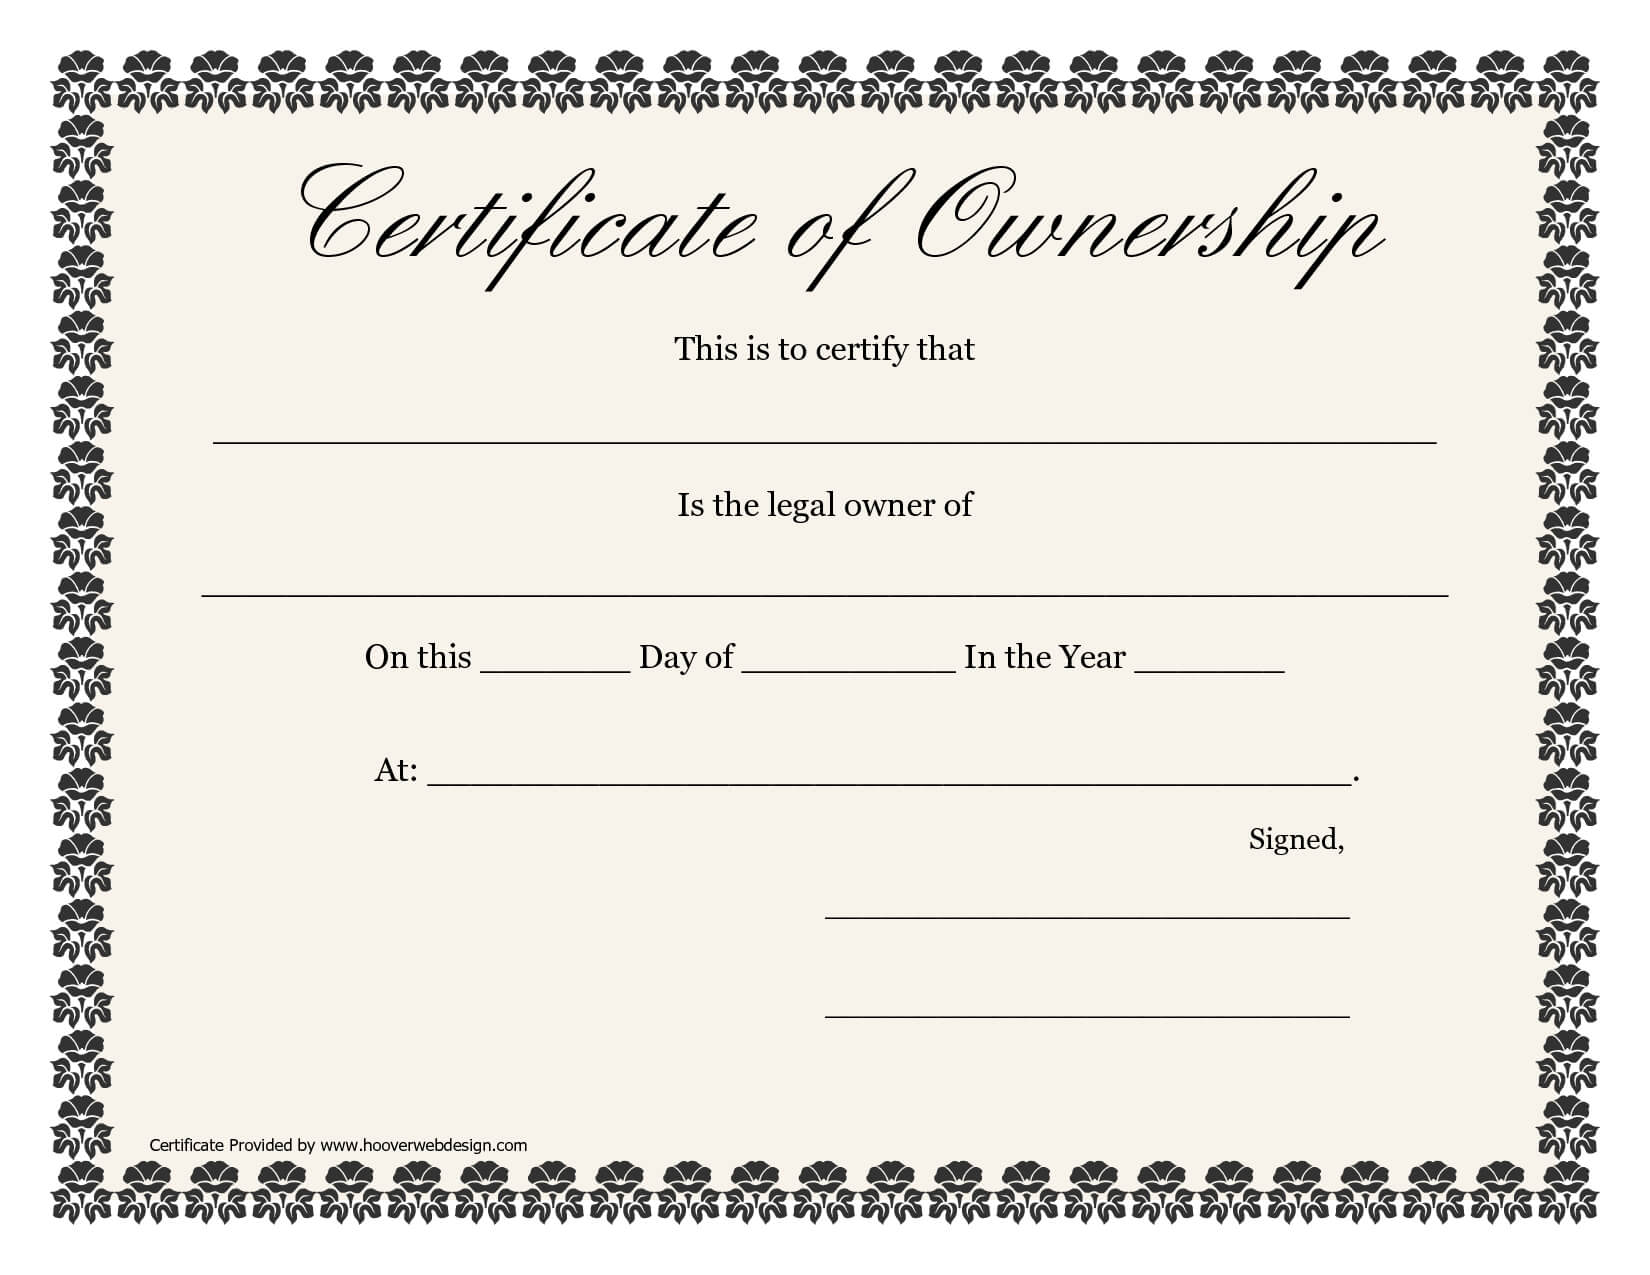 ❤️5+ Free Sample Of Certificate Of Ownership Form Template❤️ Intended For Certificate Of Ownership Template